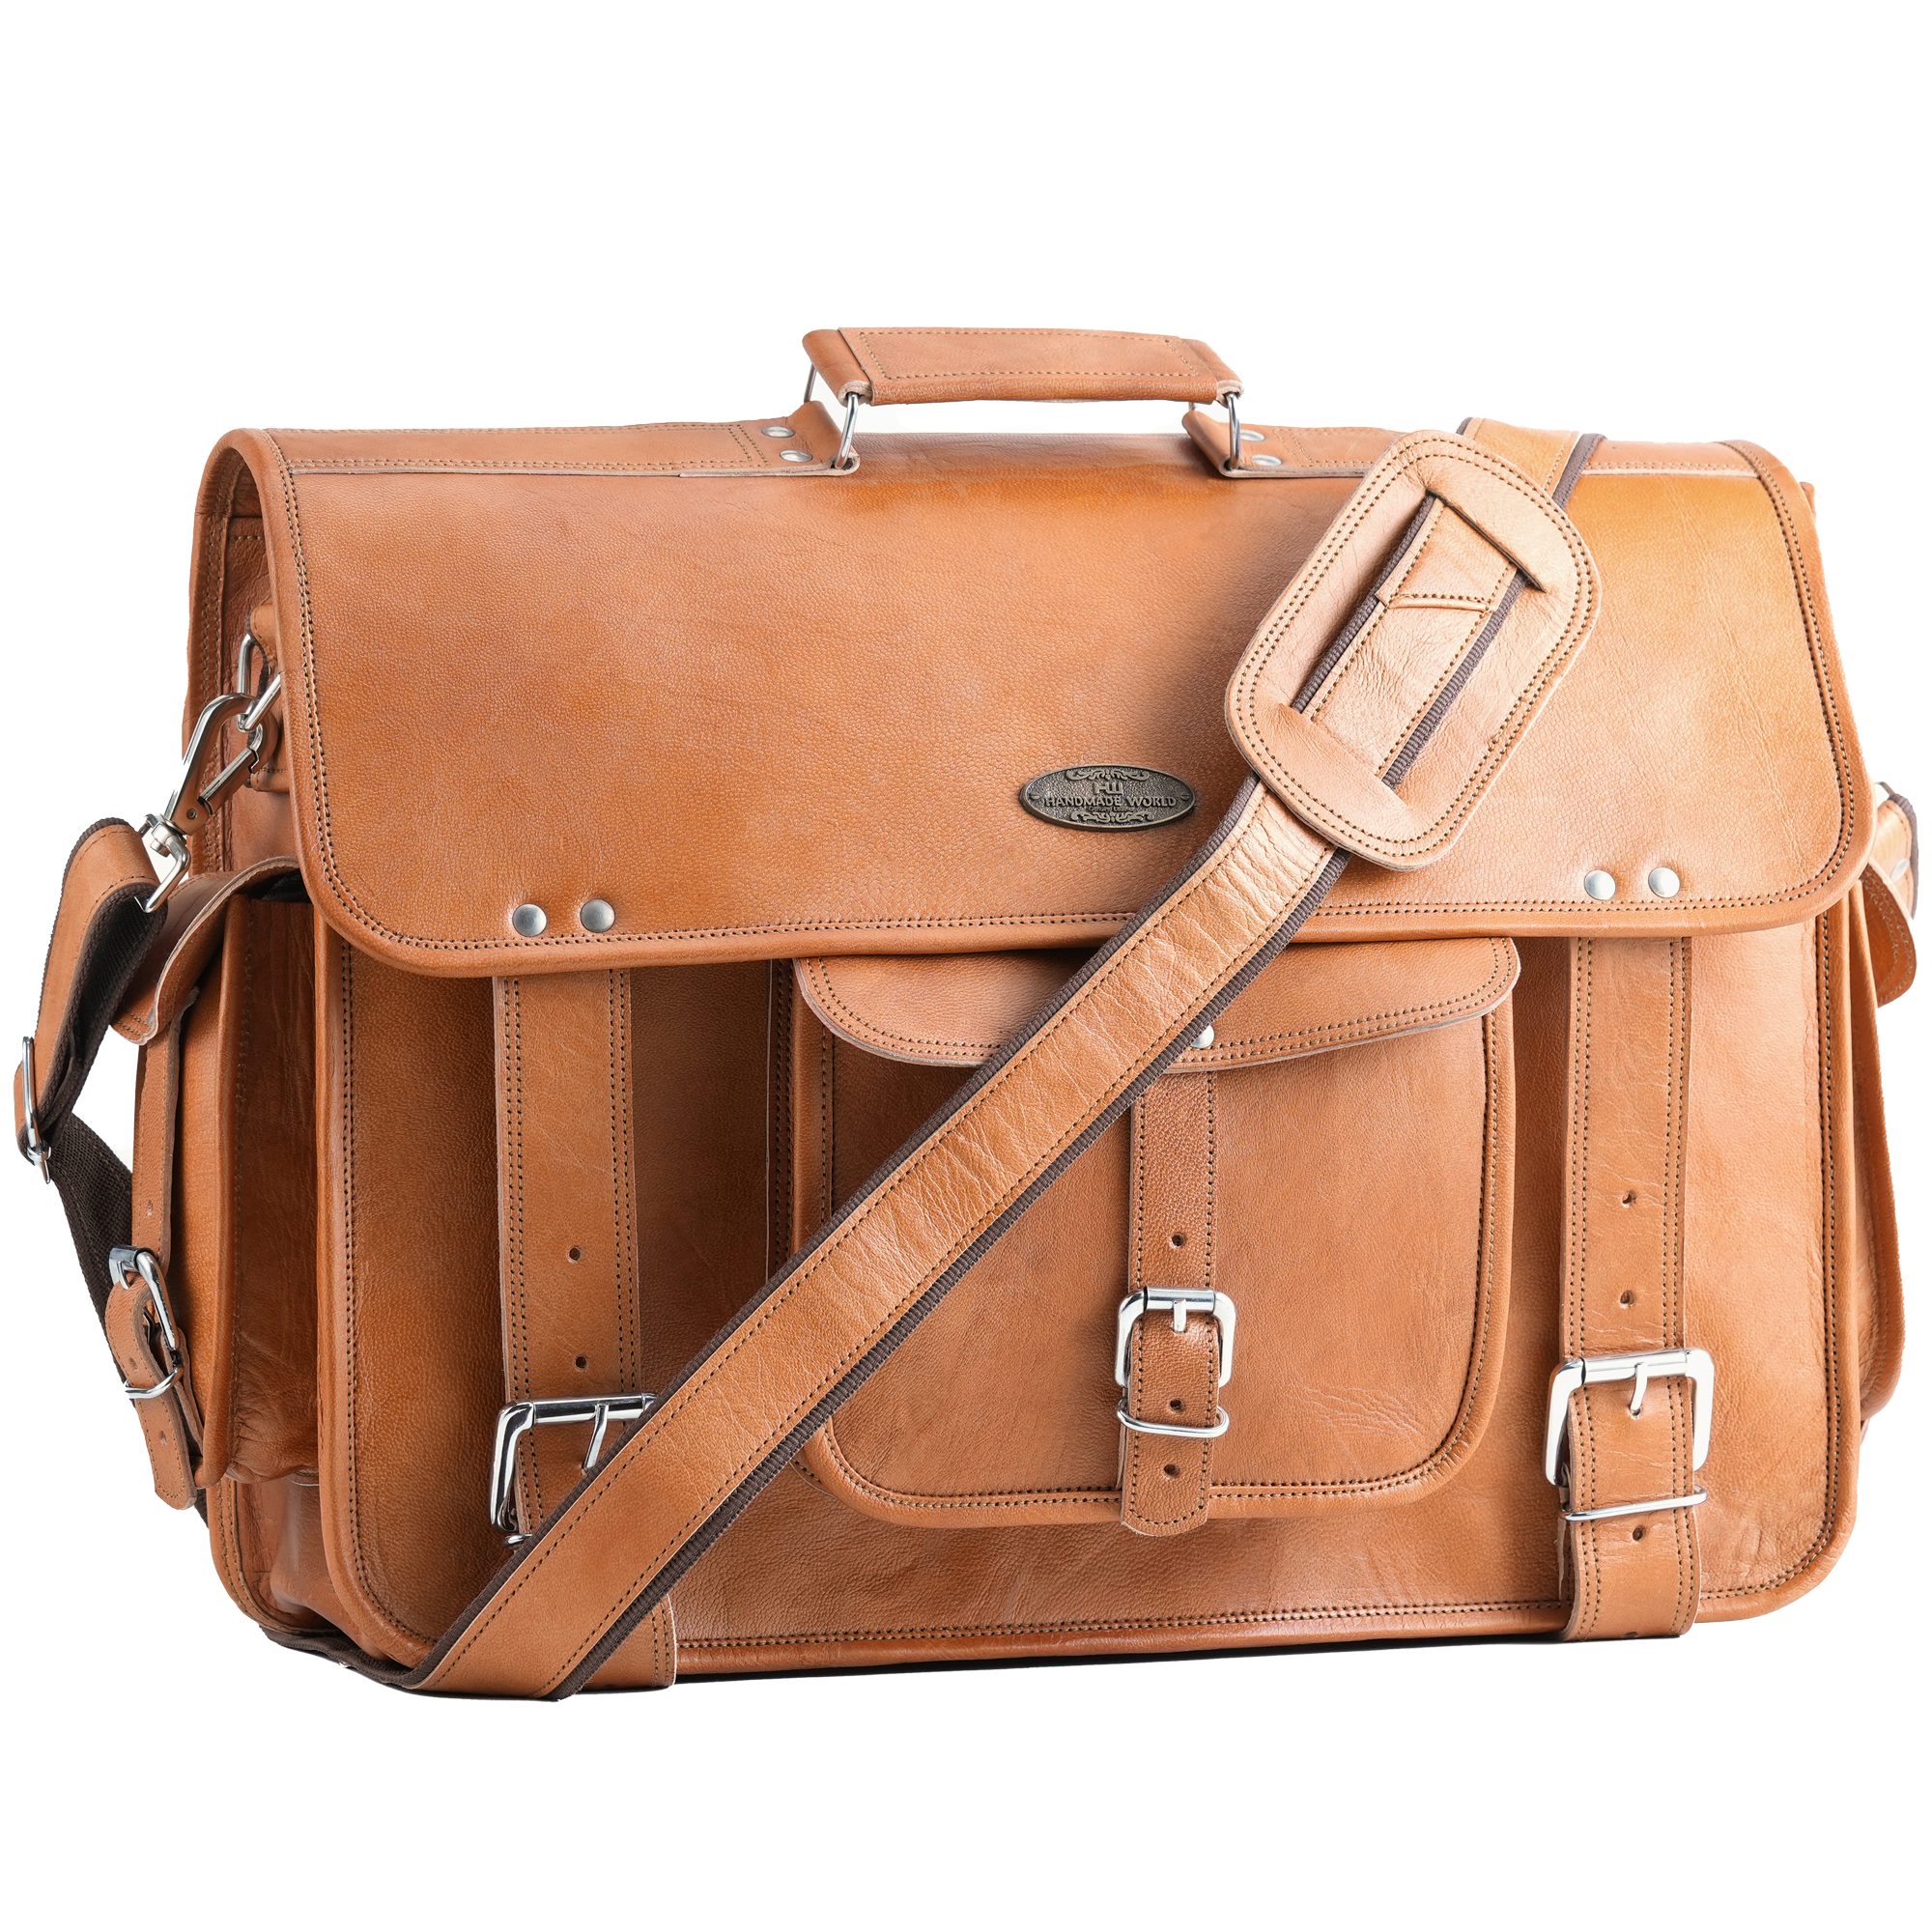 Handmade World Tan Leather Messenger Bag with front pocket and 2 buckles and shoulder strap